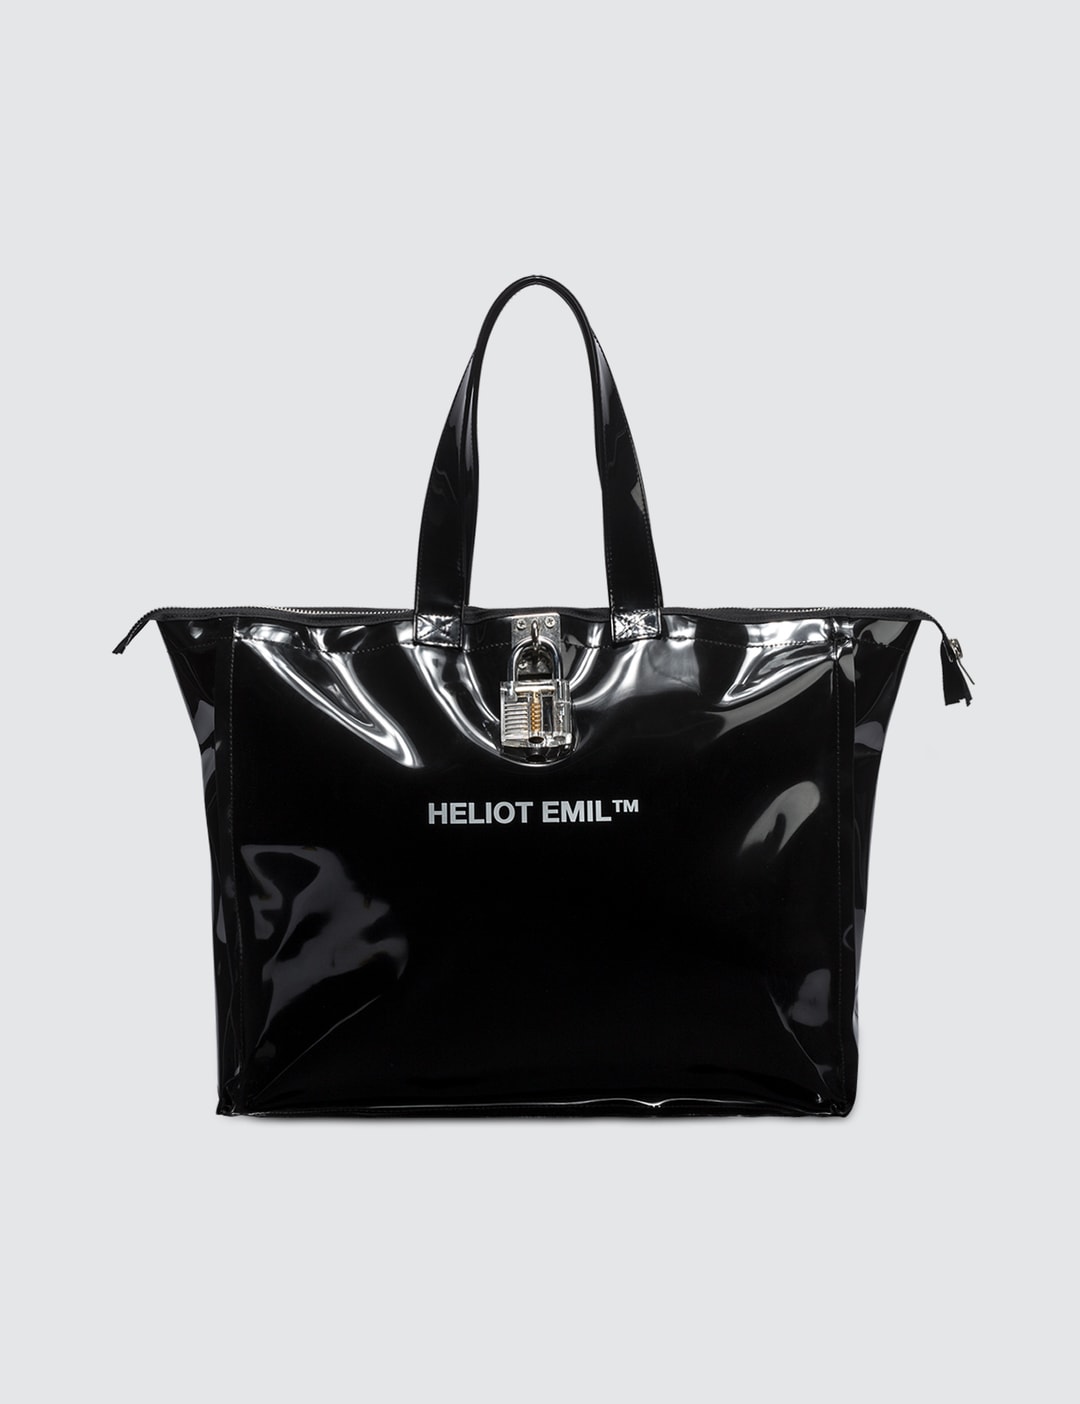 Økologi dusin hver gang Heliot Emil - Vinyl Tote Bag | HBX - Globally Curated Fashion and Lifestyle  by Hypebeast